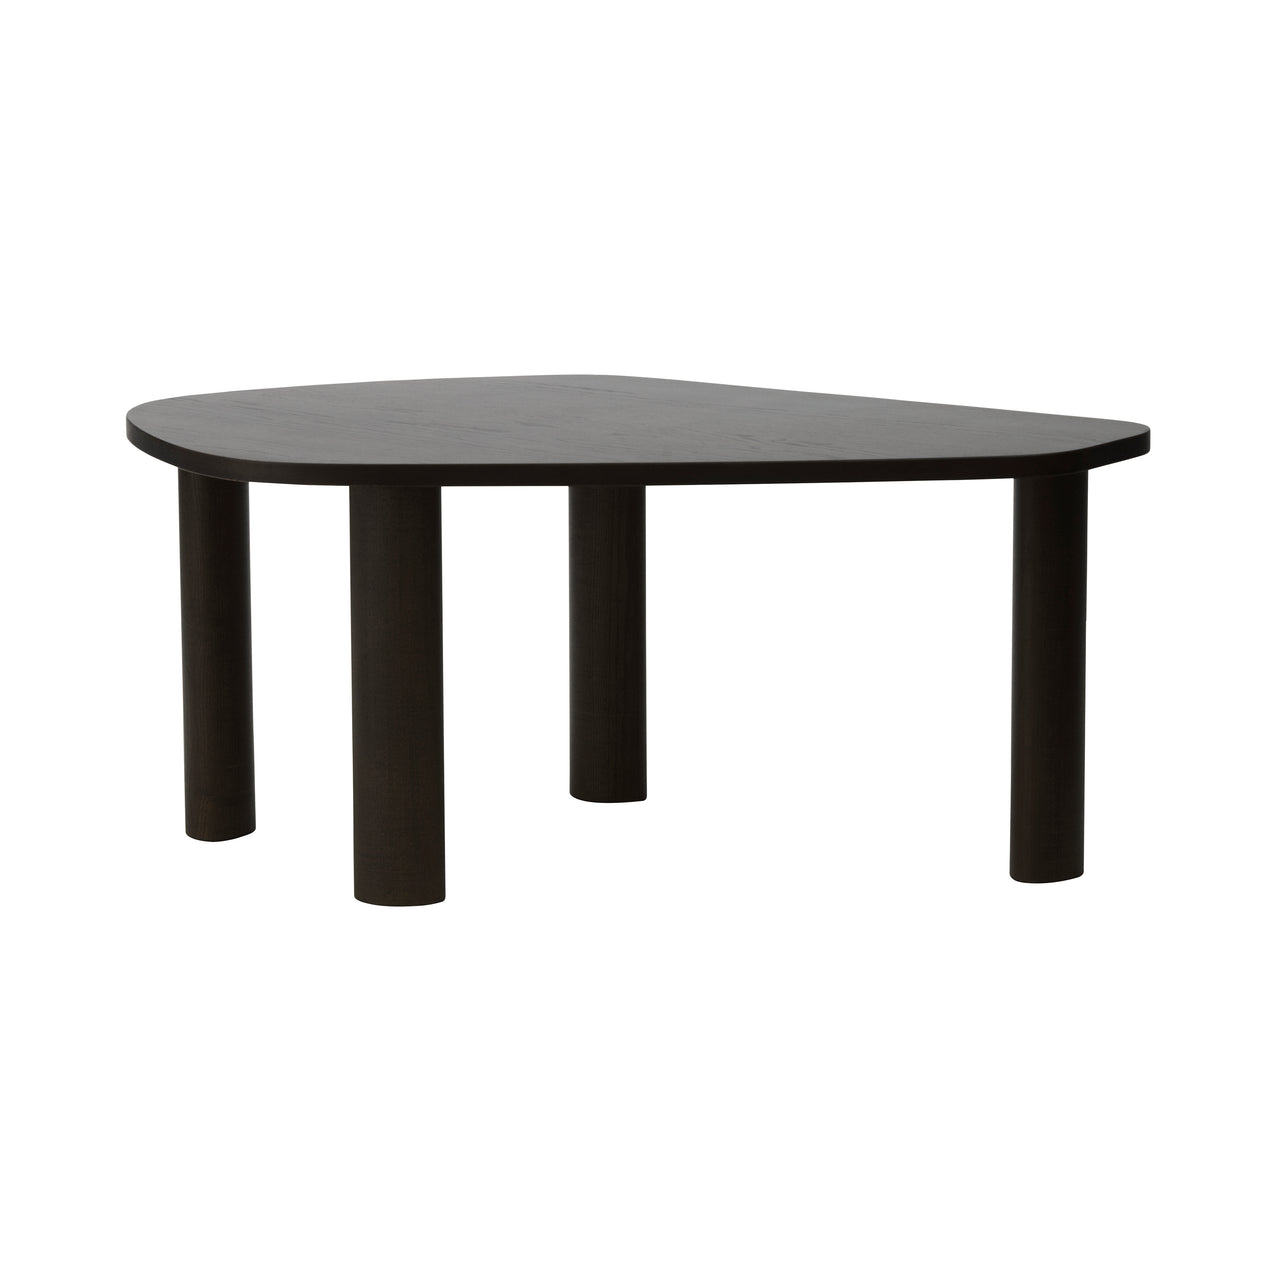 Sculp Coffee Table: Large - 18.5